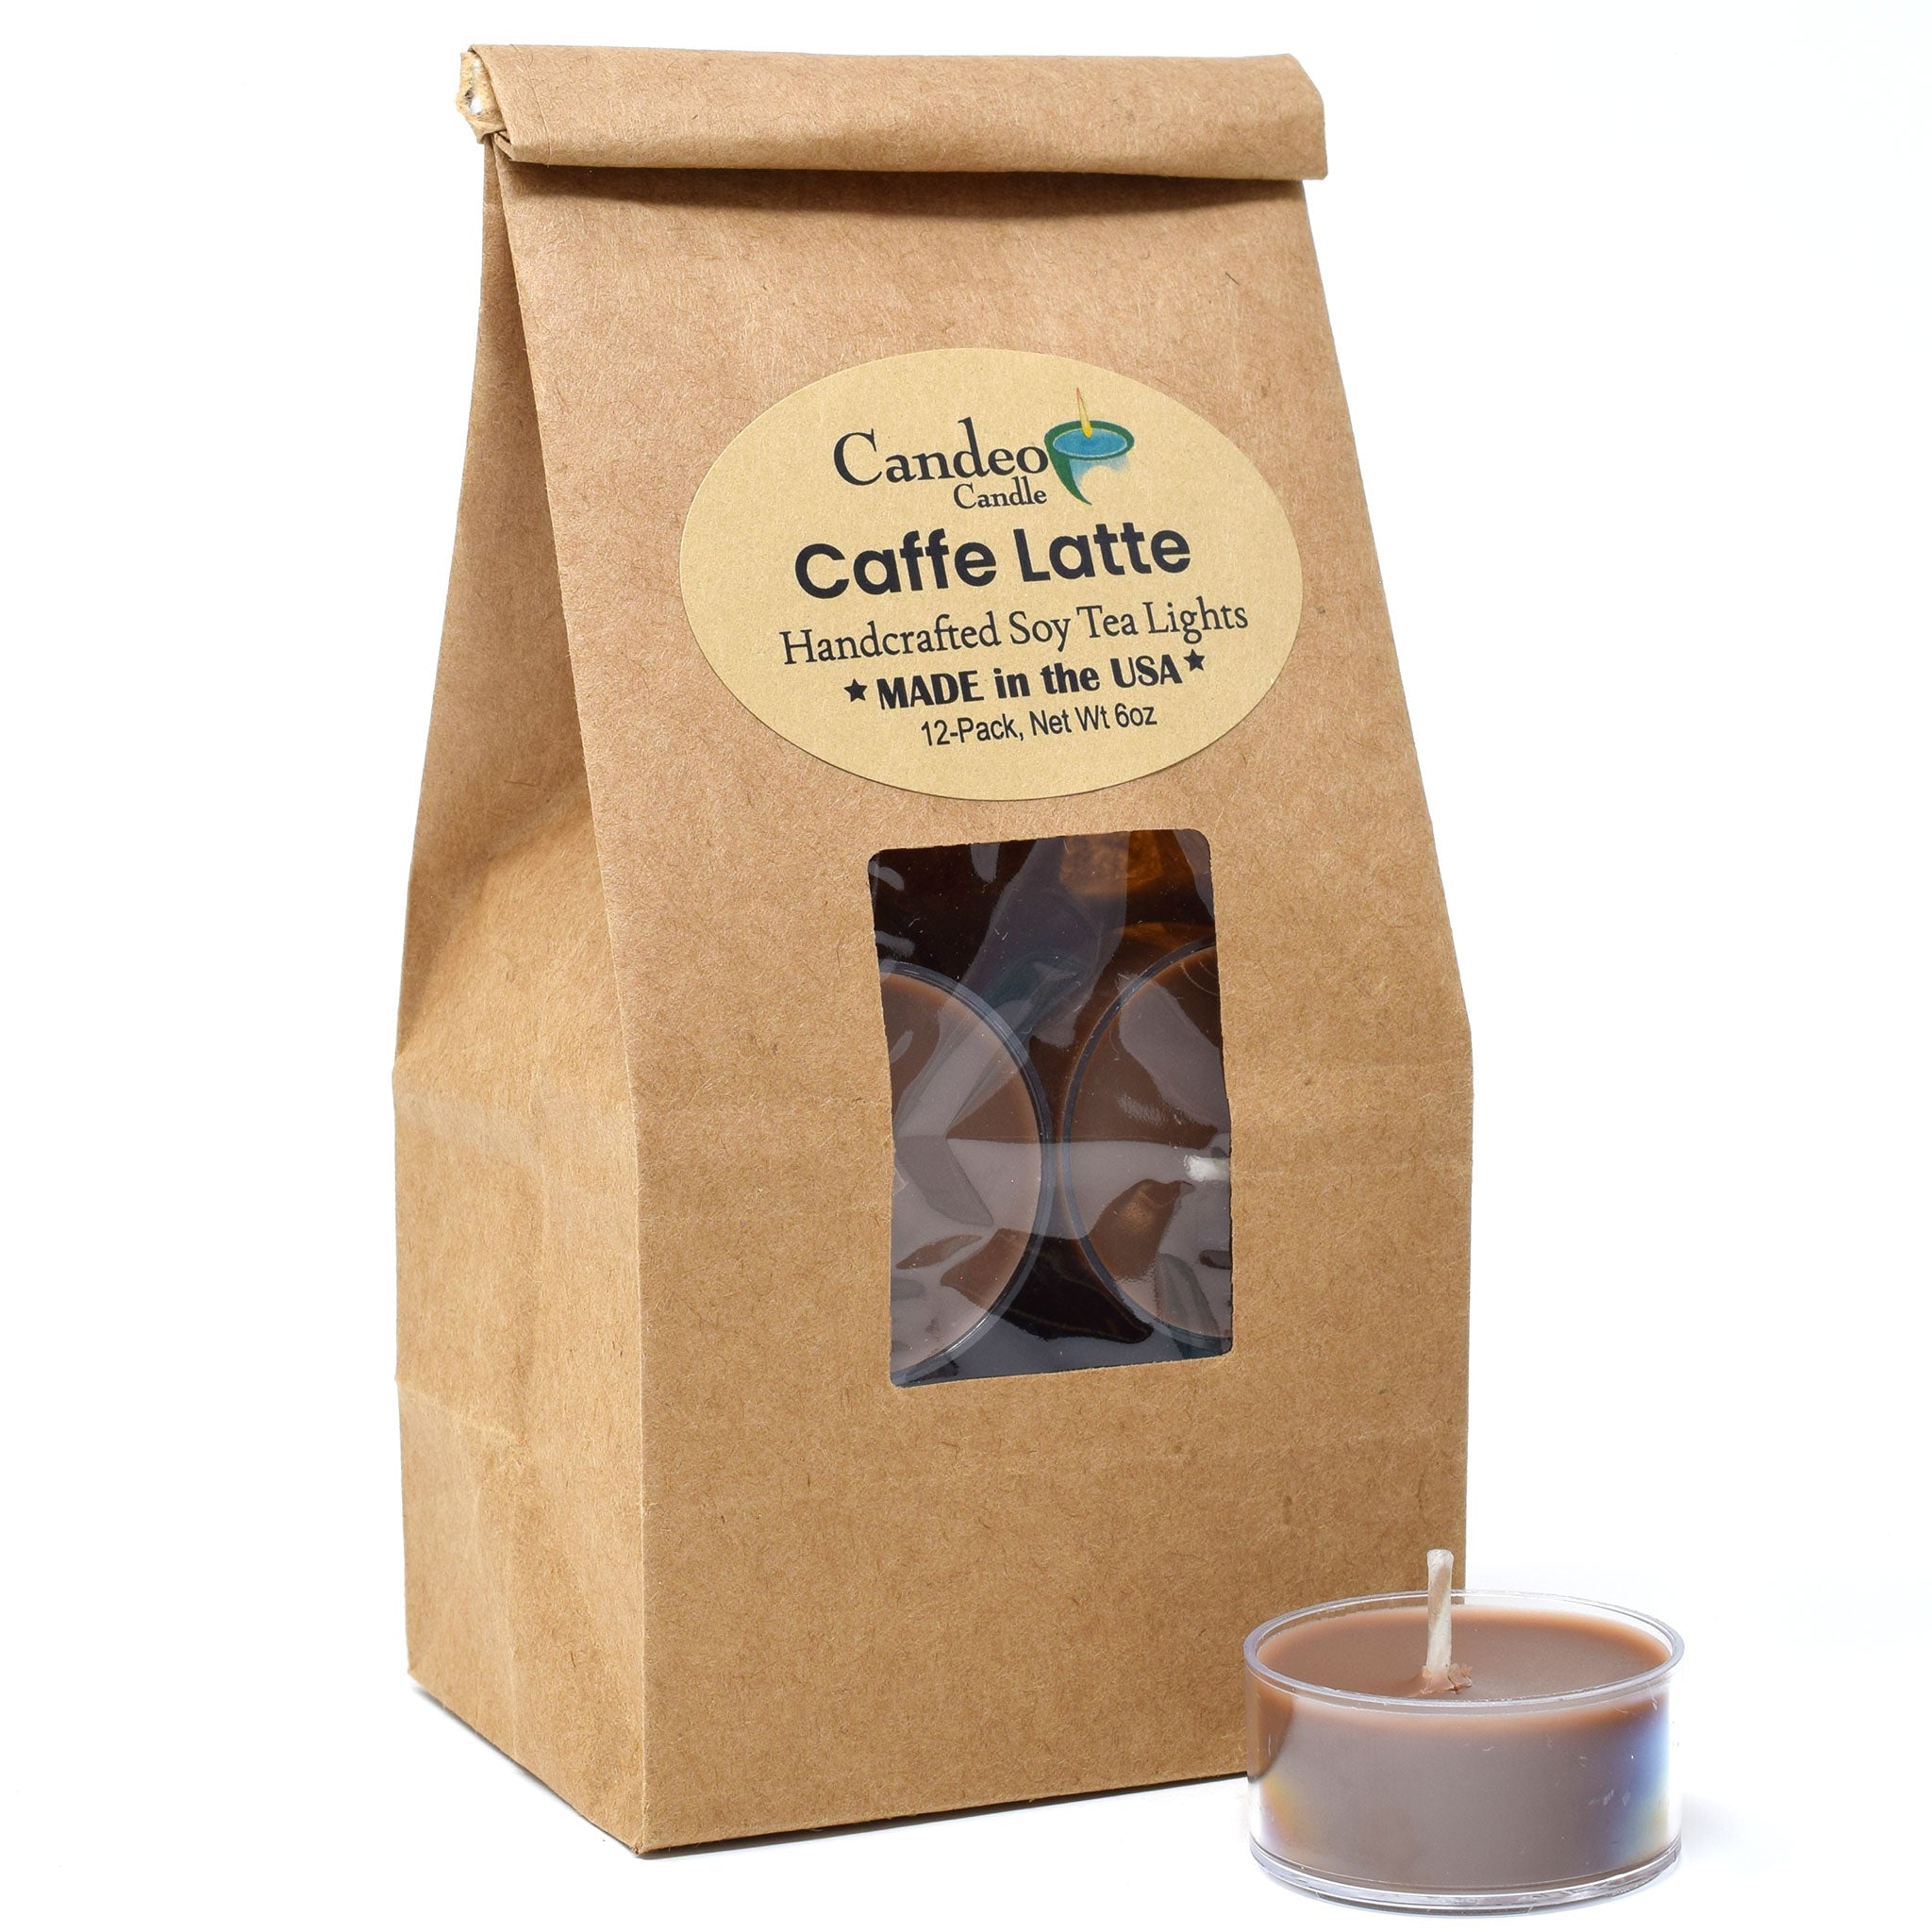 Caffe Latte, Soy Tea Light 12-Pack - Candeo Candle